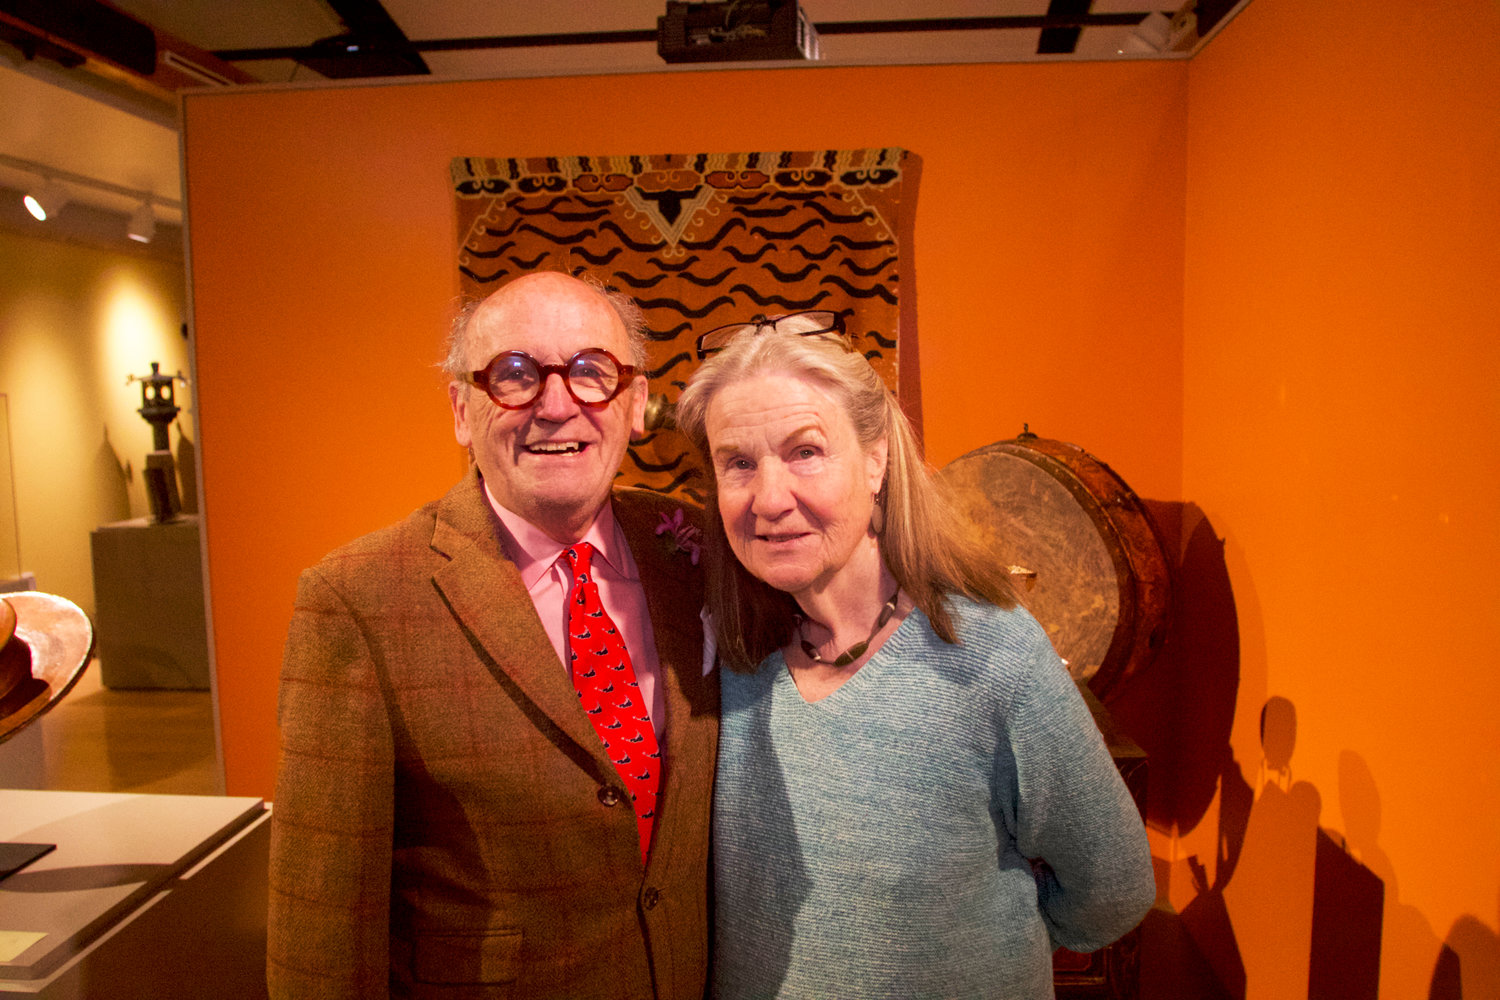 David Billings and Beverly Hall at the Nantucket Whaling Museum, surrounded by objects from “Asian Treasures from the Billings Collection.”